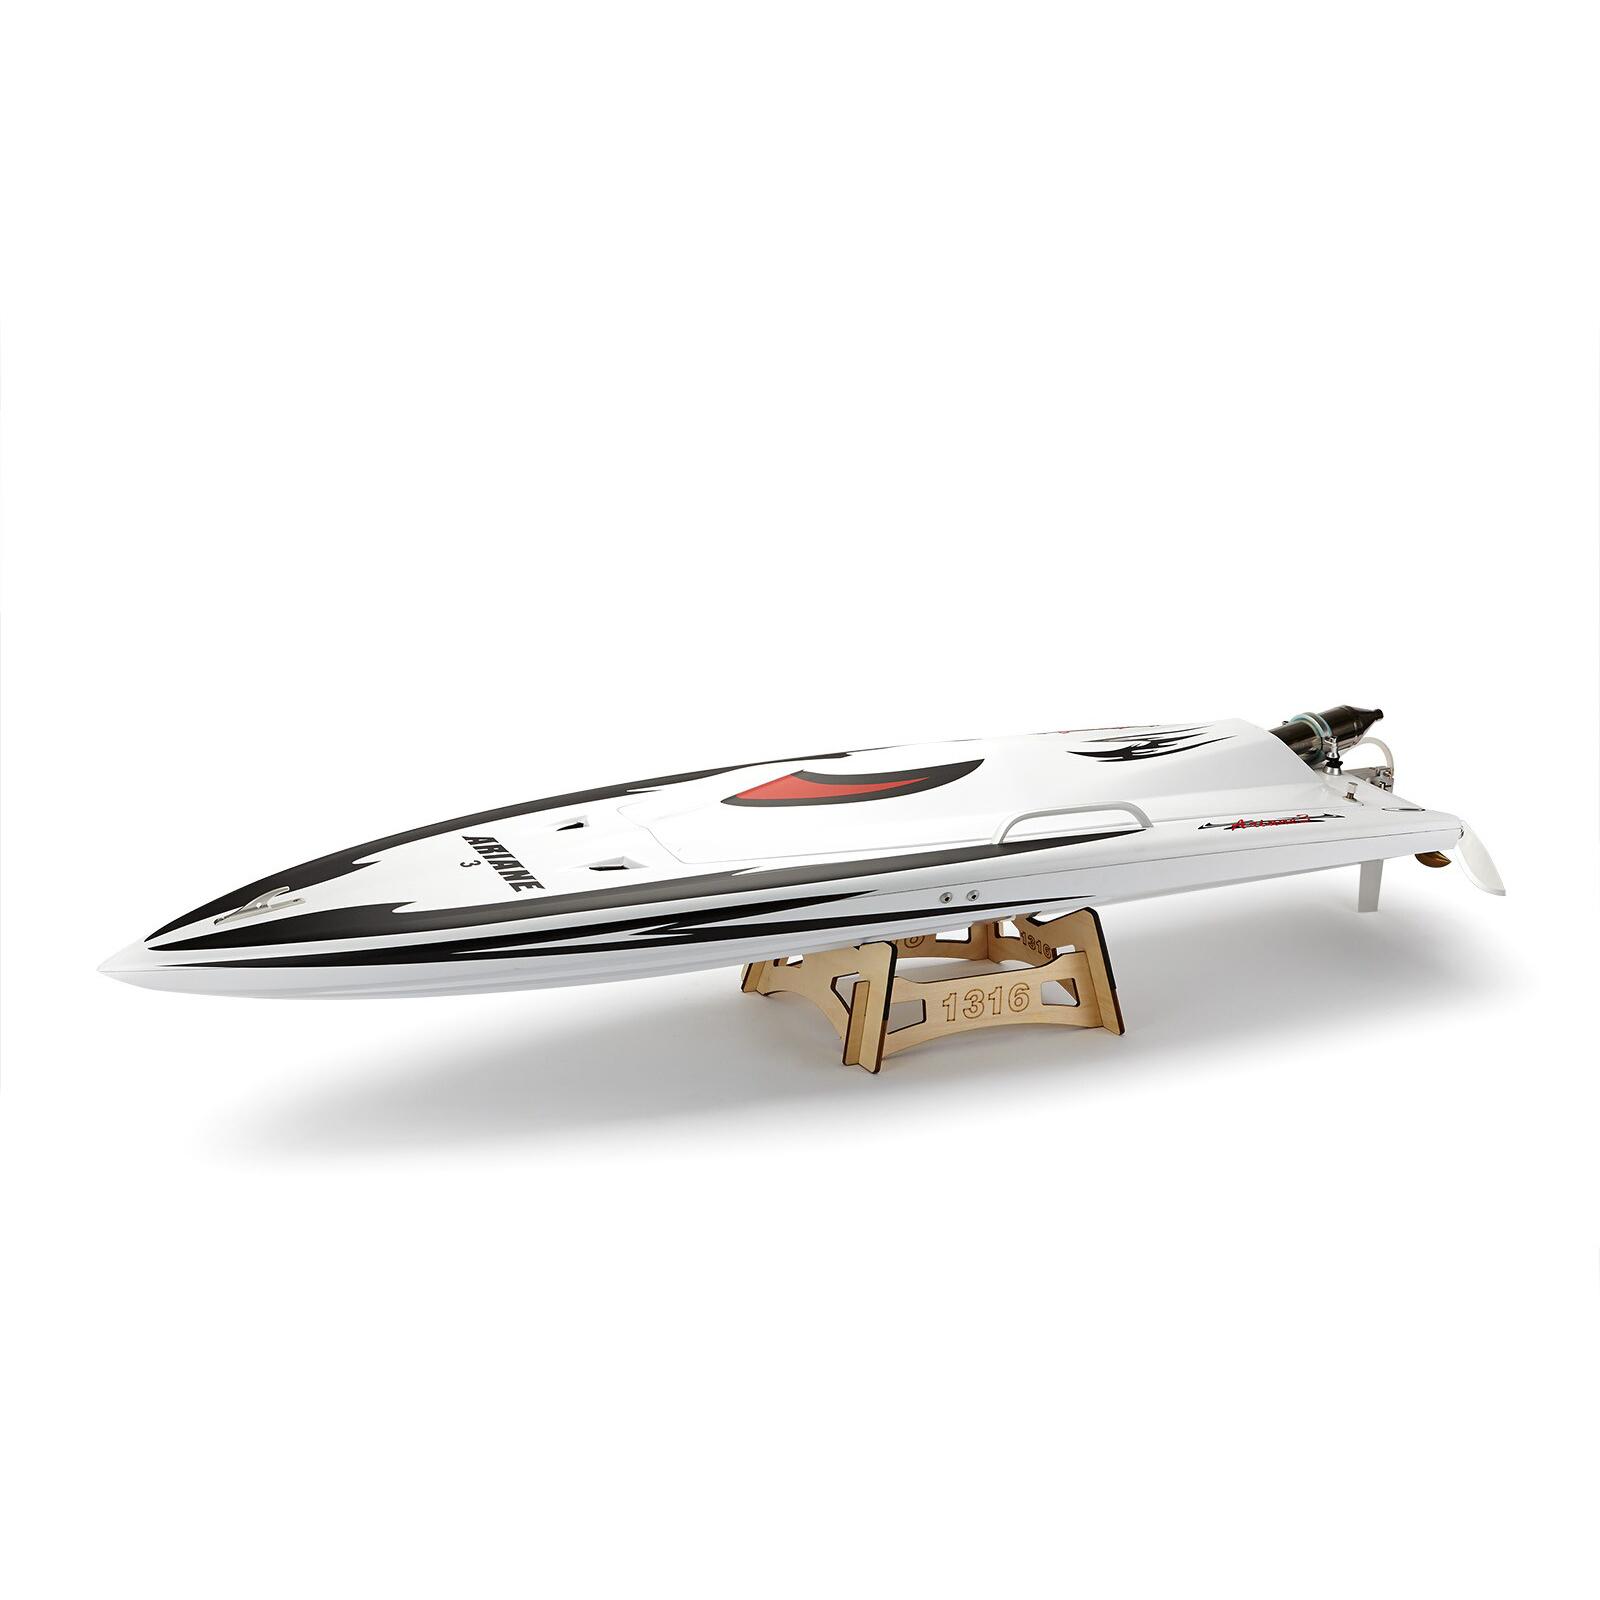 TURN FINS for medium size RC Boat TFL Pursuit Ariane 2 shipped from USA 